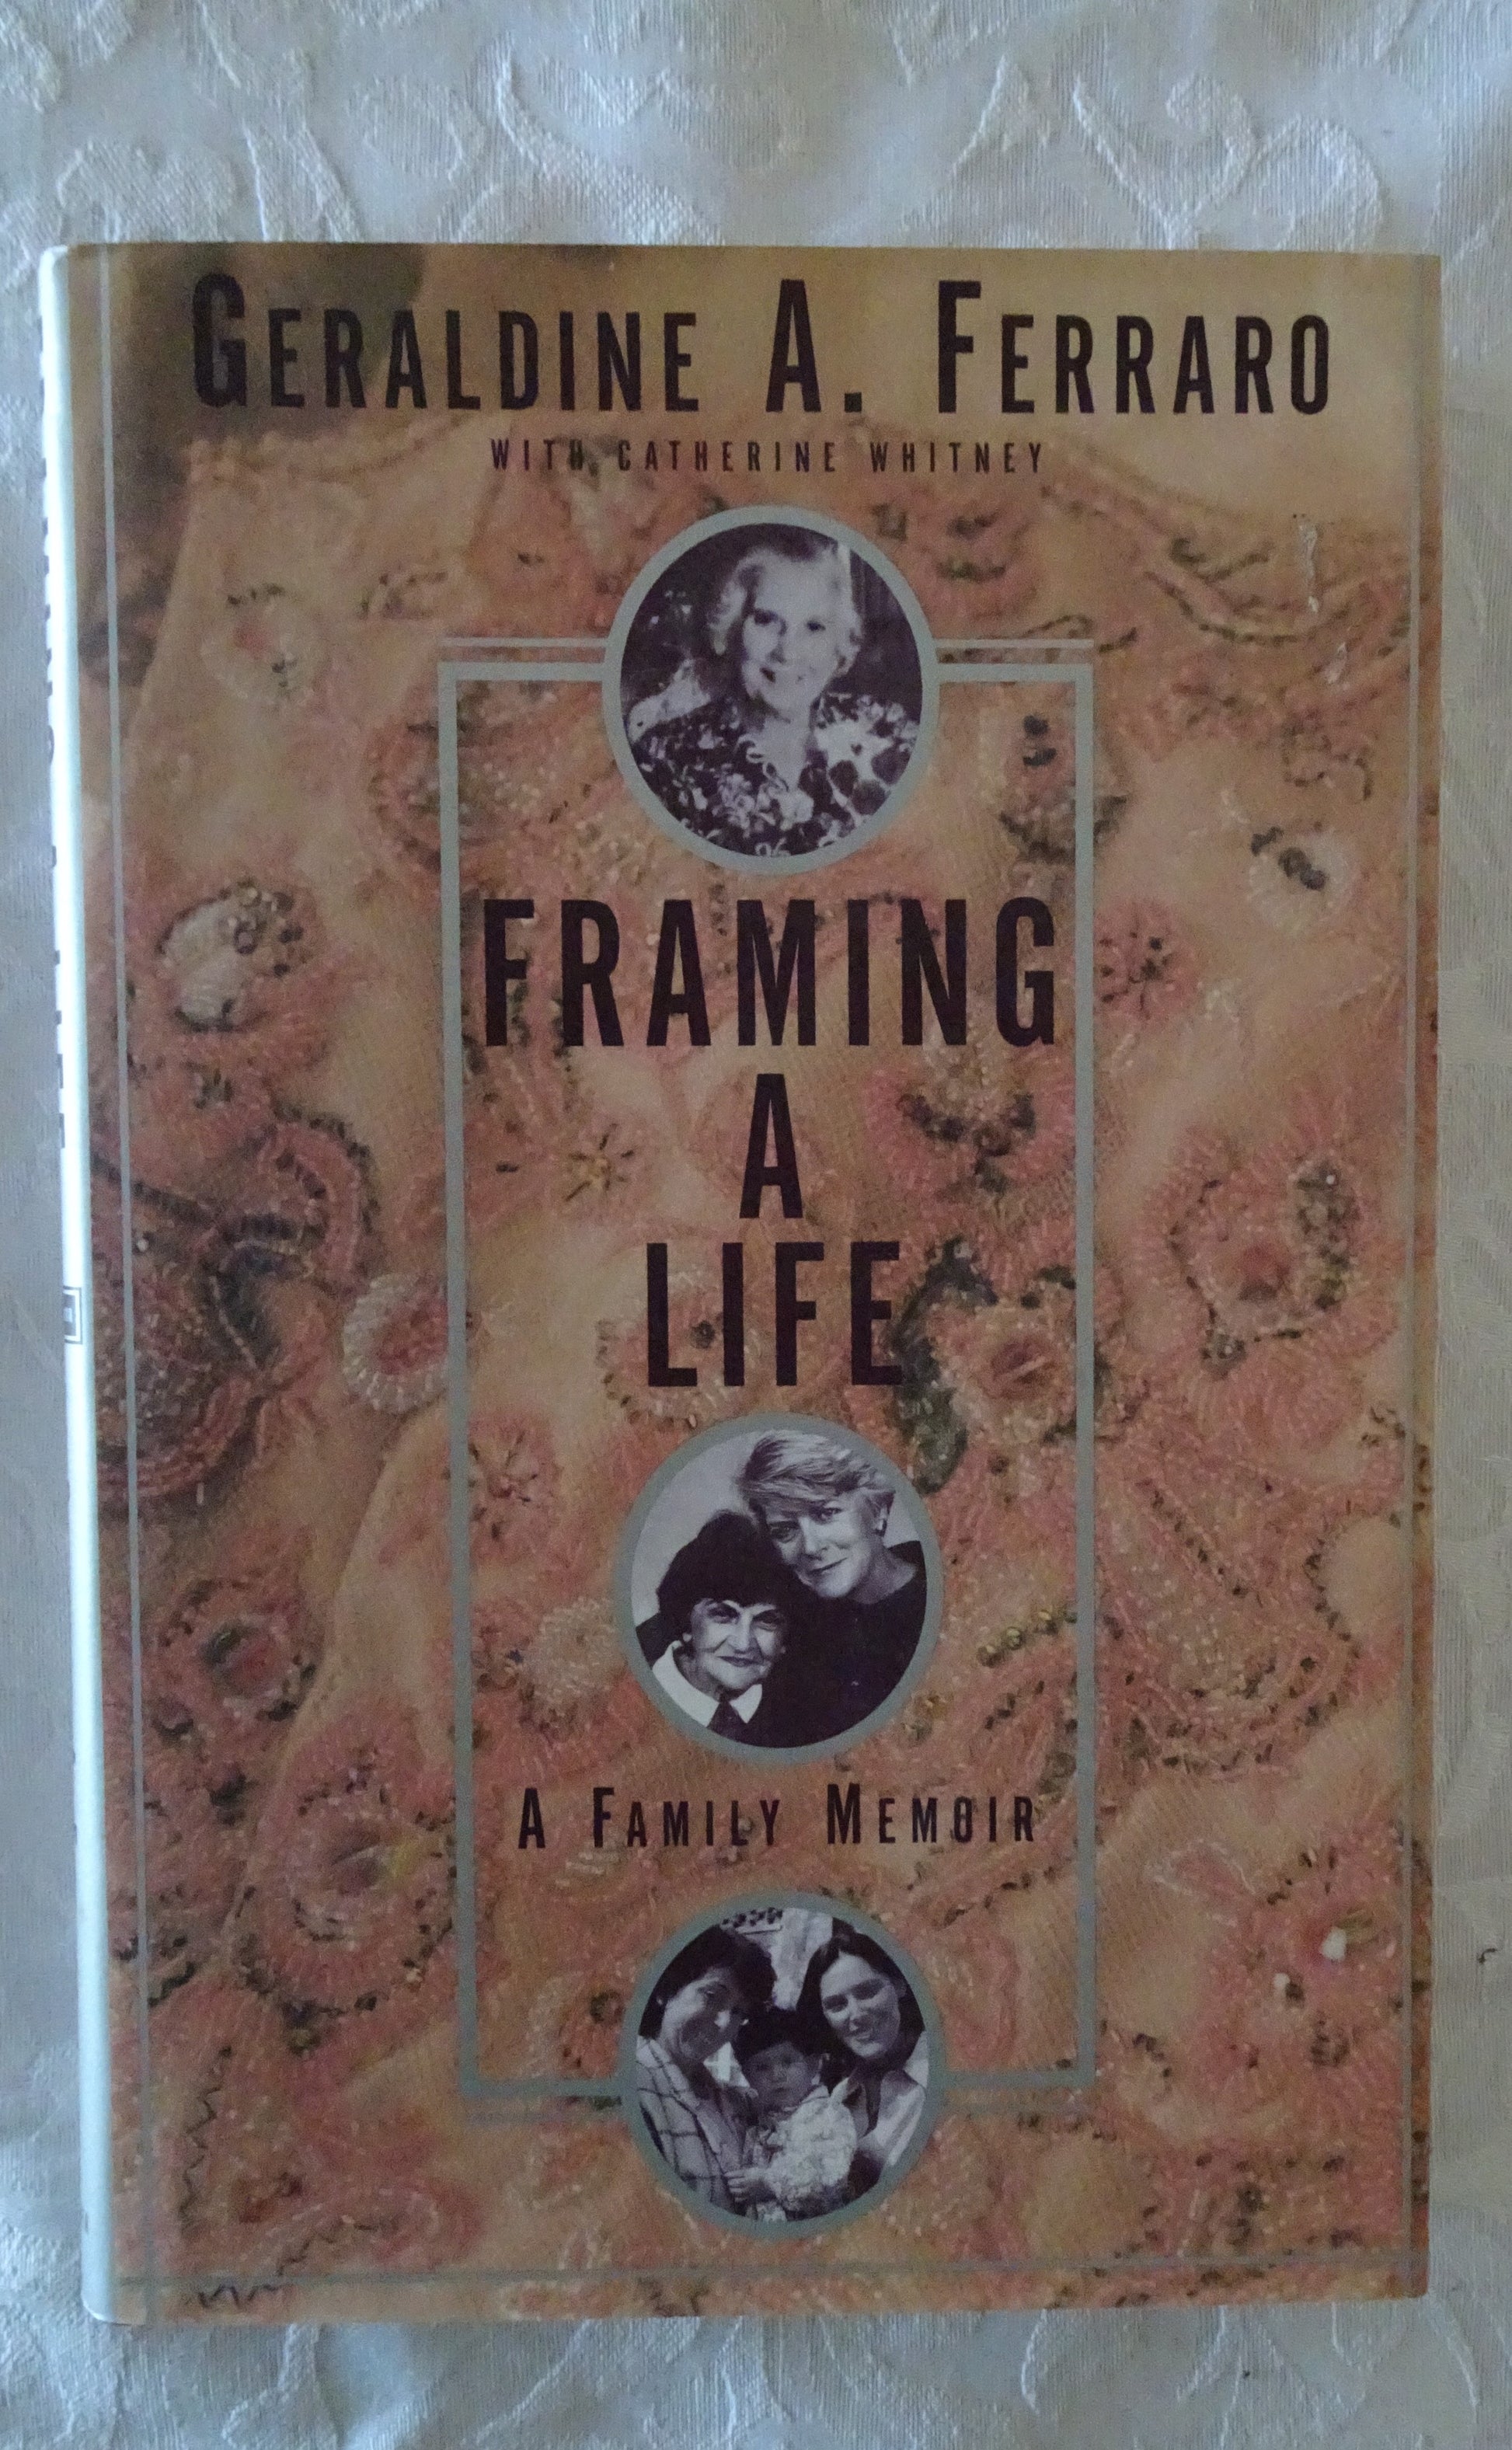 Framing A Life  A Family Memoir  by Geraldine A. Ferraro with Catherine Whitney